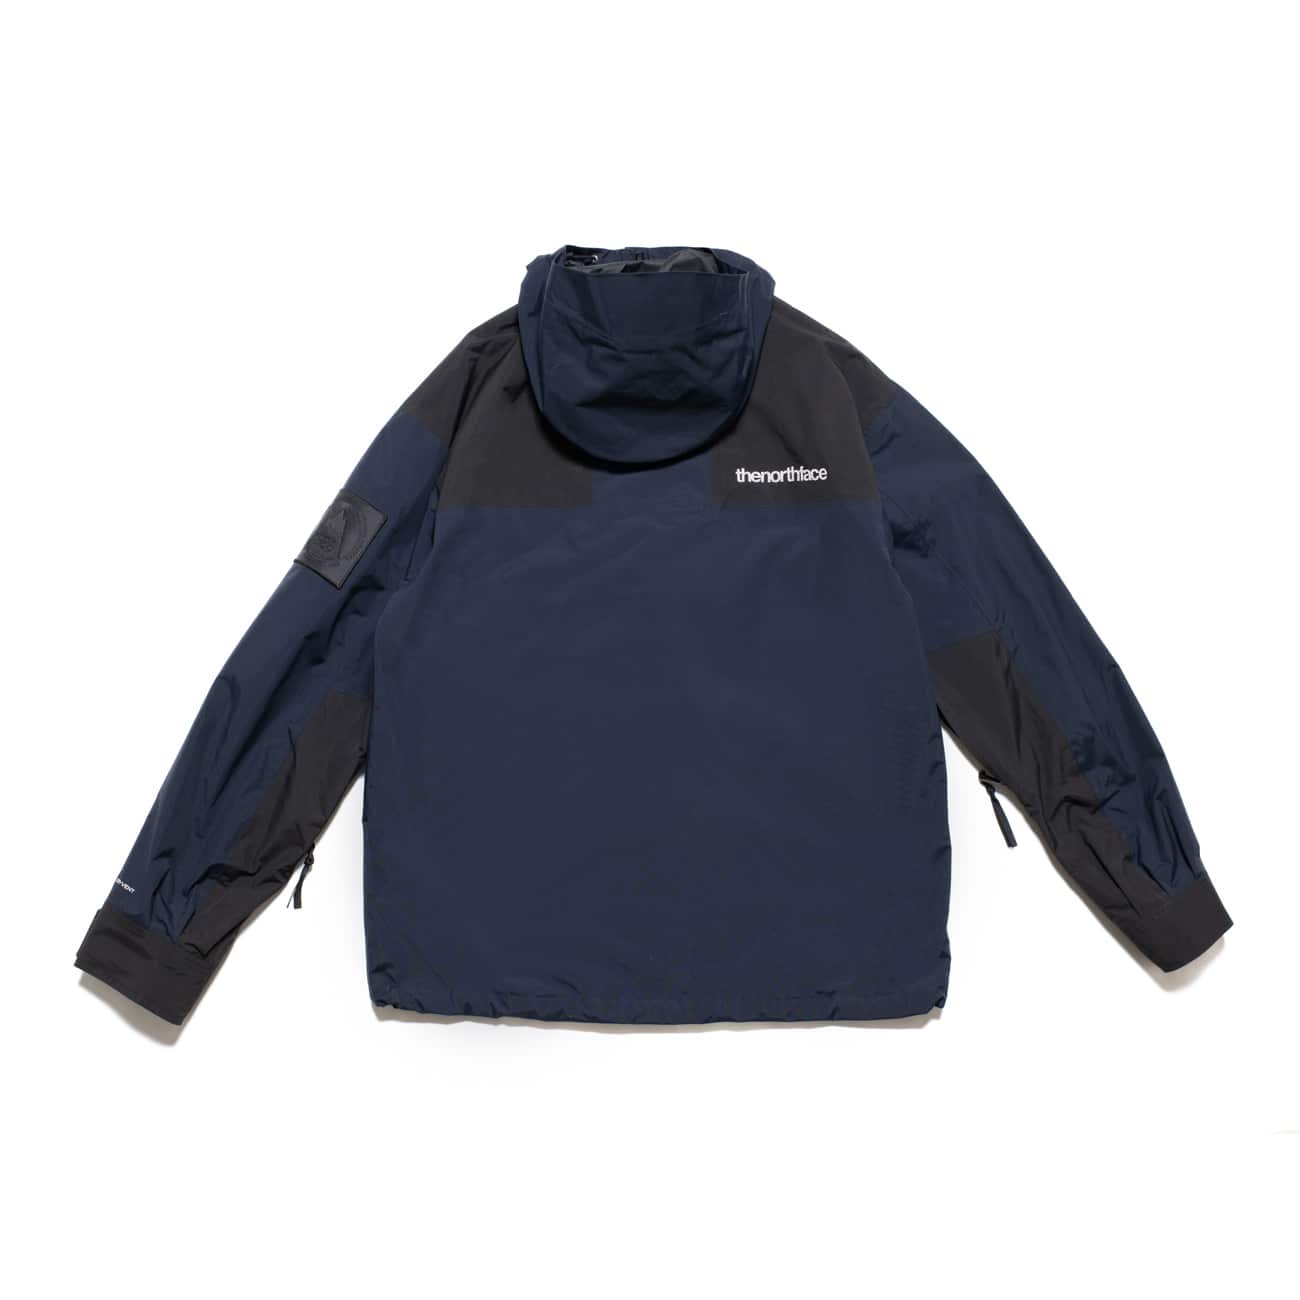 The North Face Dryvent Jacket Blue